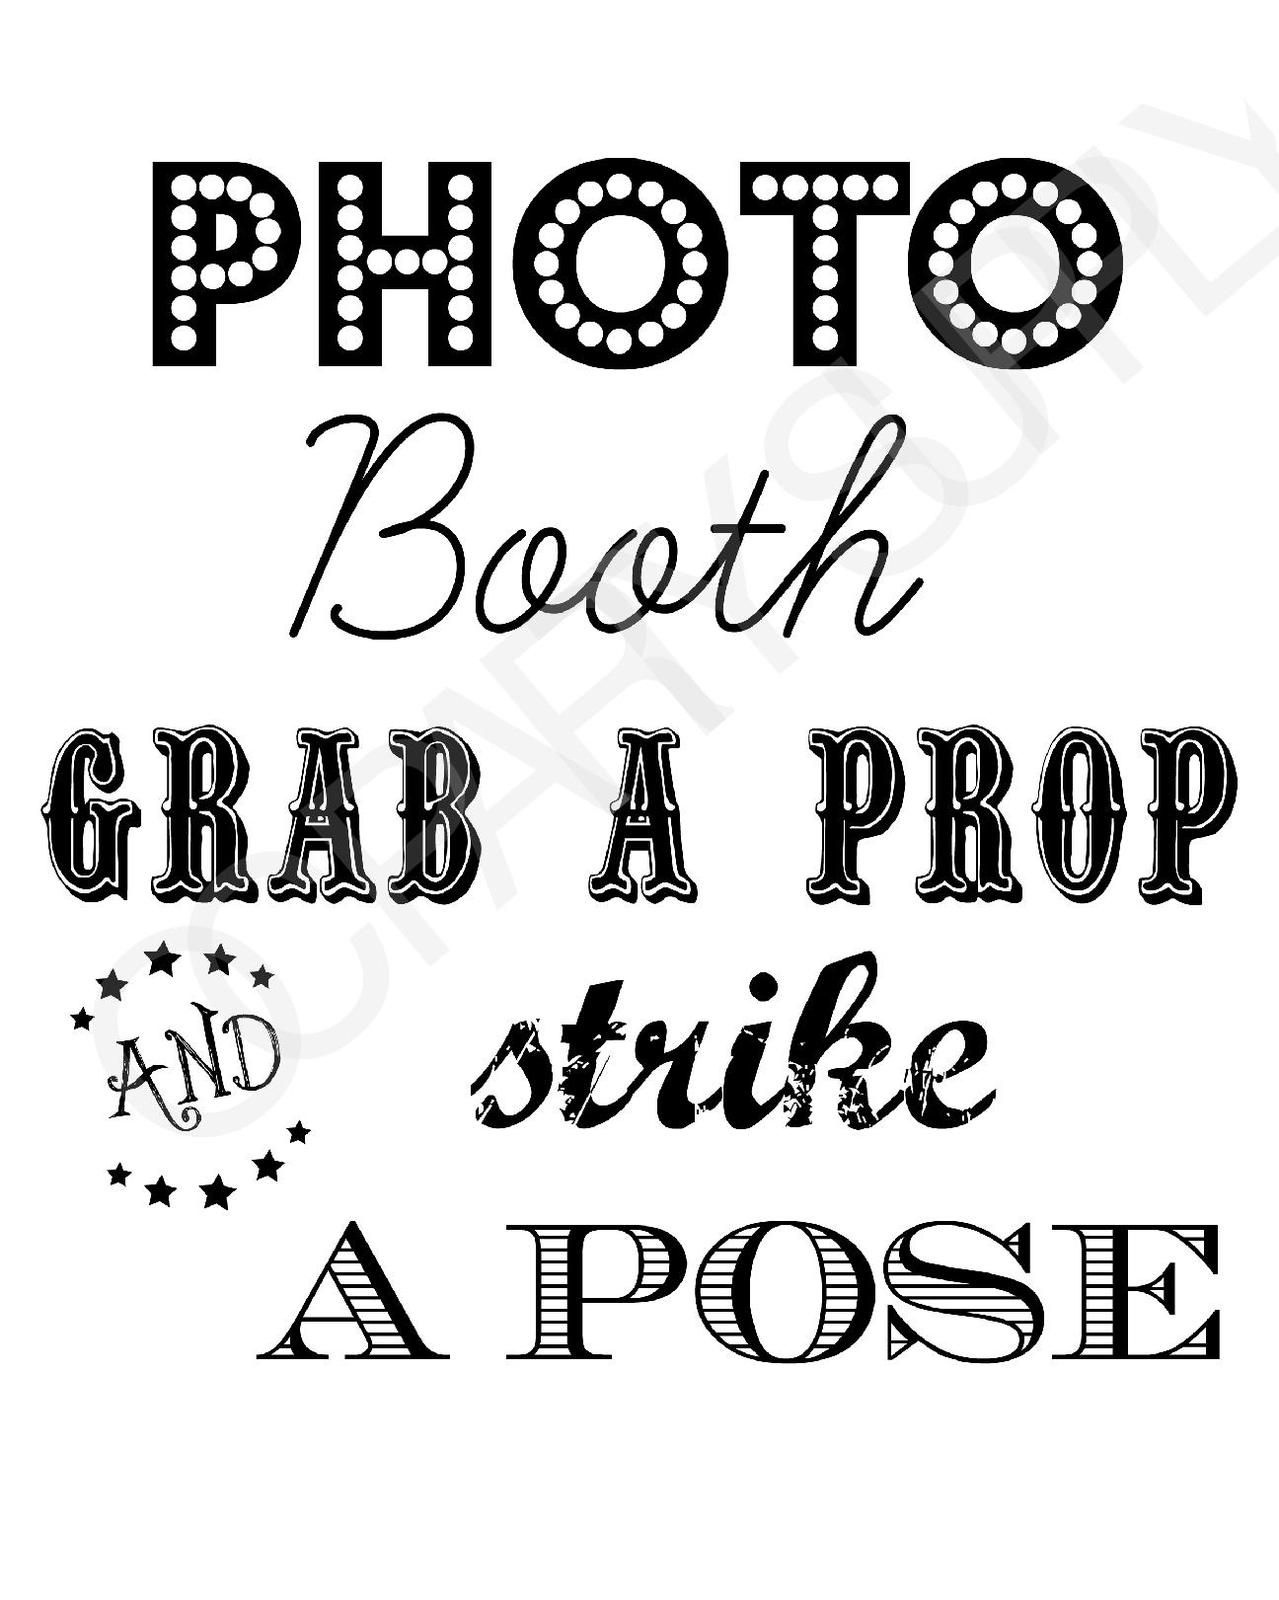 Free Photo Booth Sign (Printable) | Photo Props - Free Printable Photo Booth Sign